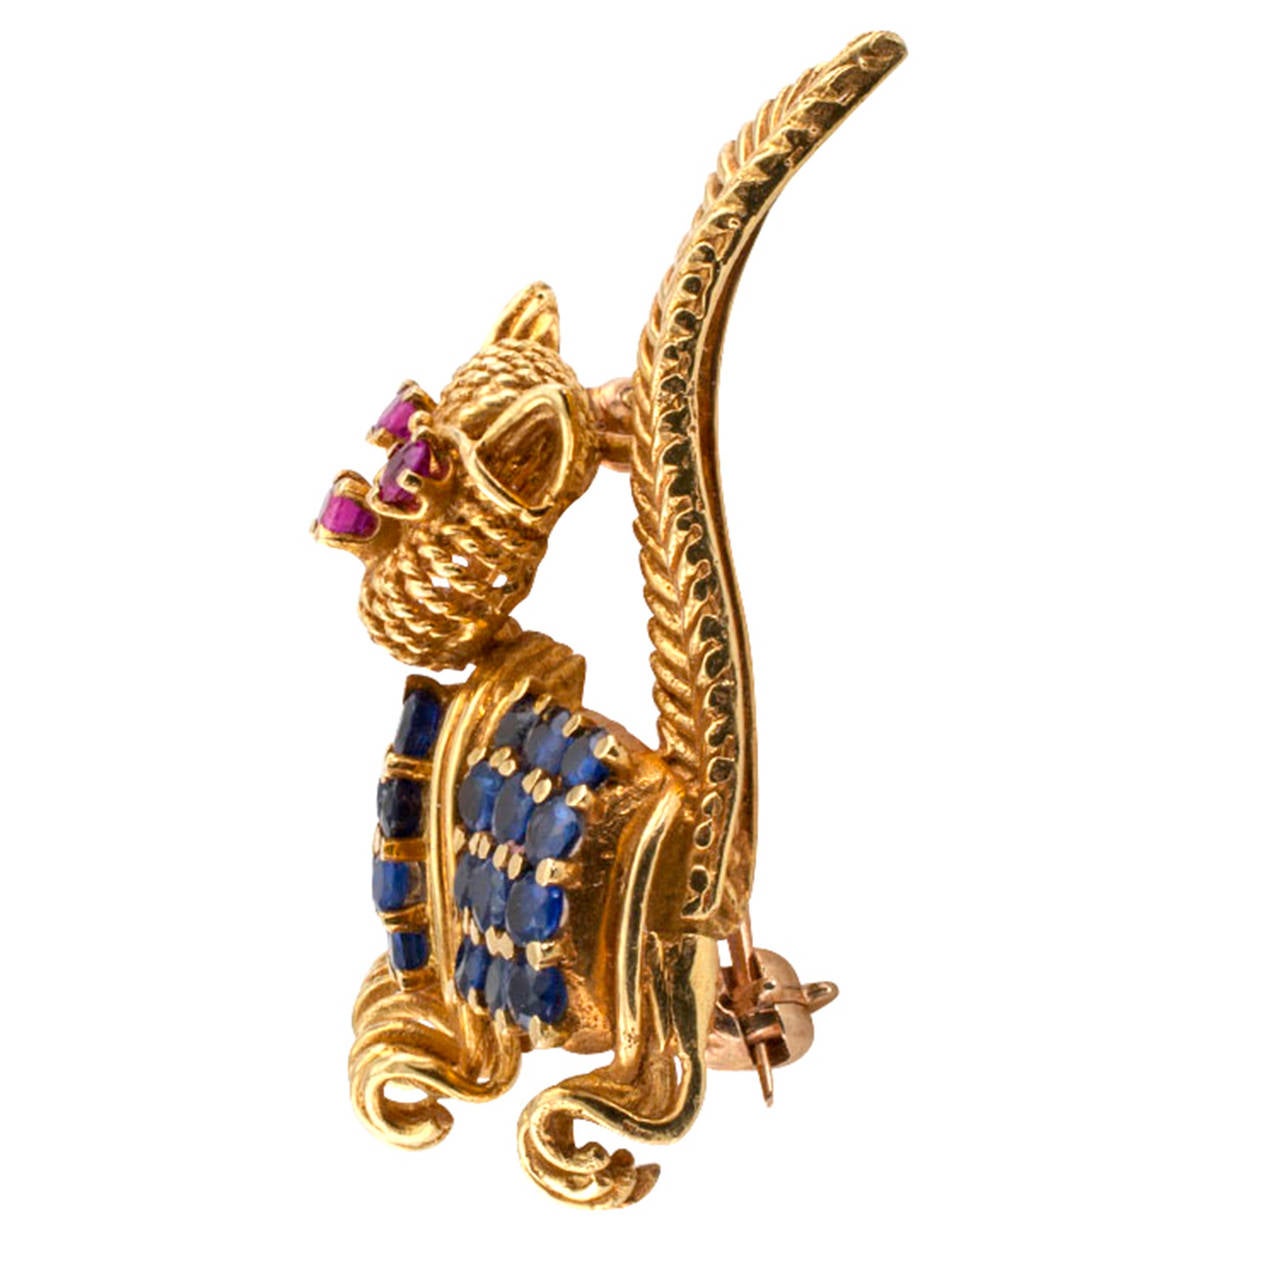 Tiffany & Co. Whimsical Ruby and Sapphire Cat Brooch

This adorable Tiffany Cat Brooch is quite whimsical.  Circa 1960's, the open work design features ruby eyes and nose and the body is accented with sapphires.  Mounted in 18 karat yellow gold,